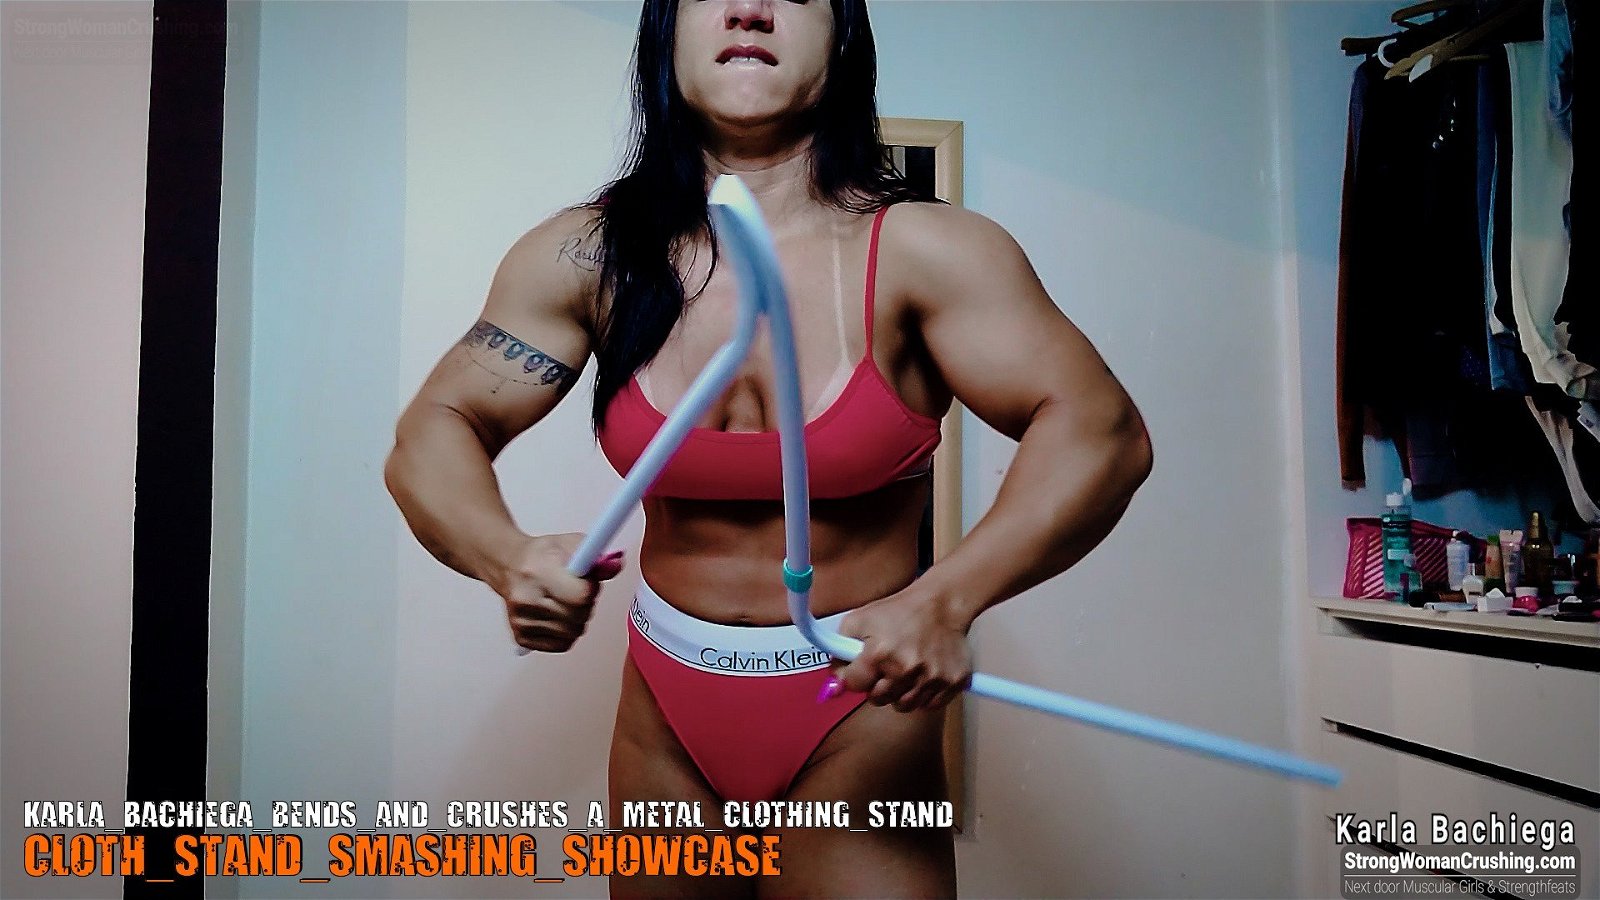 Photo by MusclegirlStrength with the username @MusclegirlStrength, who is a brand user,  January 9, 2024 at 11:06 AM and the text says 'Muscle Goddess Karla Bachiega DESTROYS Metal Stand!
Link: https://bit.ly/3FiejHT

#MuscularFemales #BulgingBiceps #StrongWomen #GoddessesofStrength #MuscleQueens #EmpoweredWomen #FlexFriday #LiftLikeAGirl #CrushingIt #PowerfulPhysiques #BeastModeWomen..'